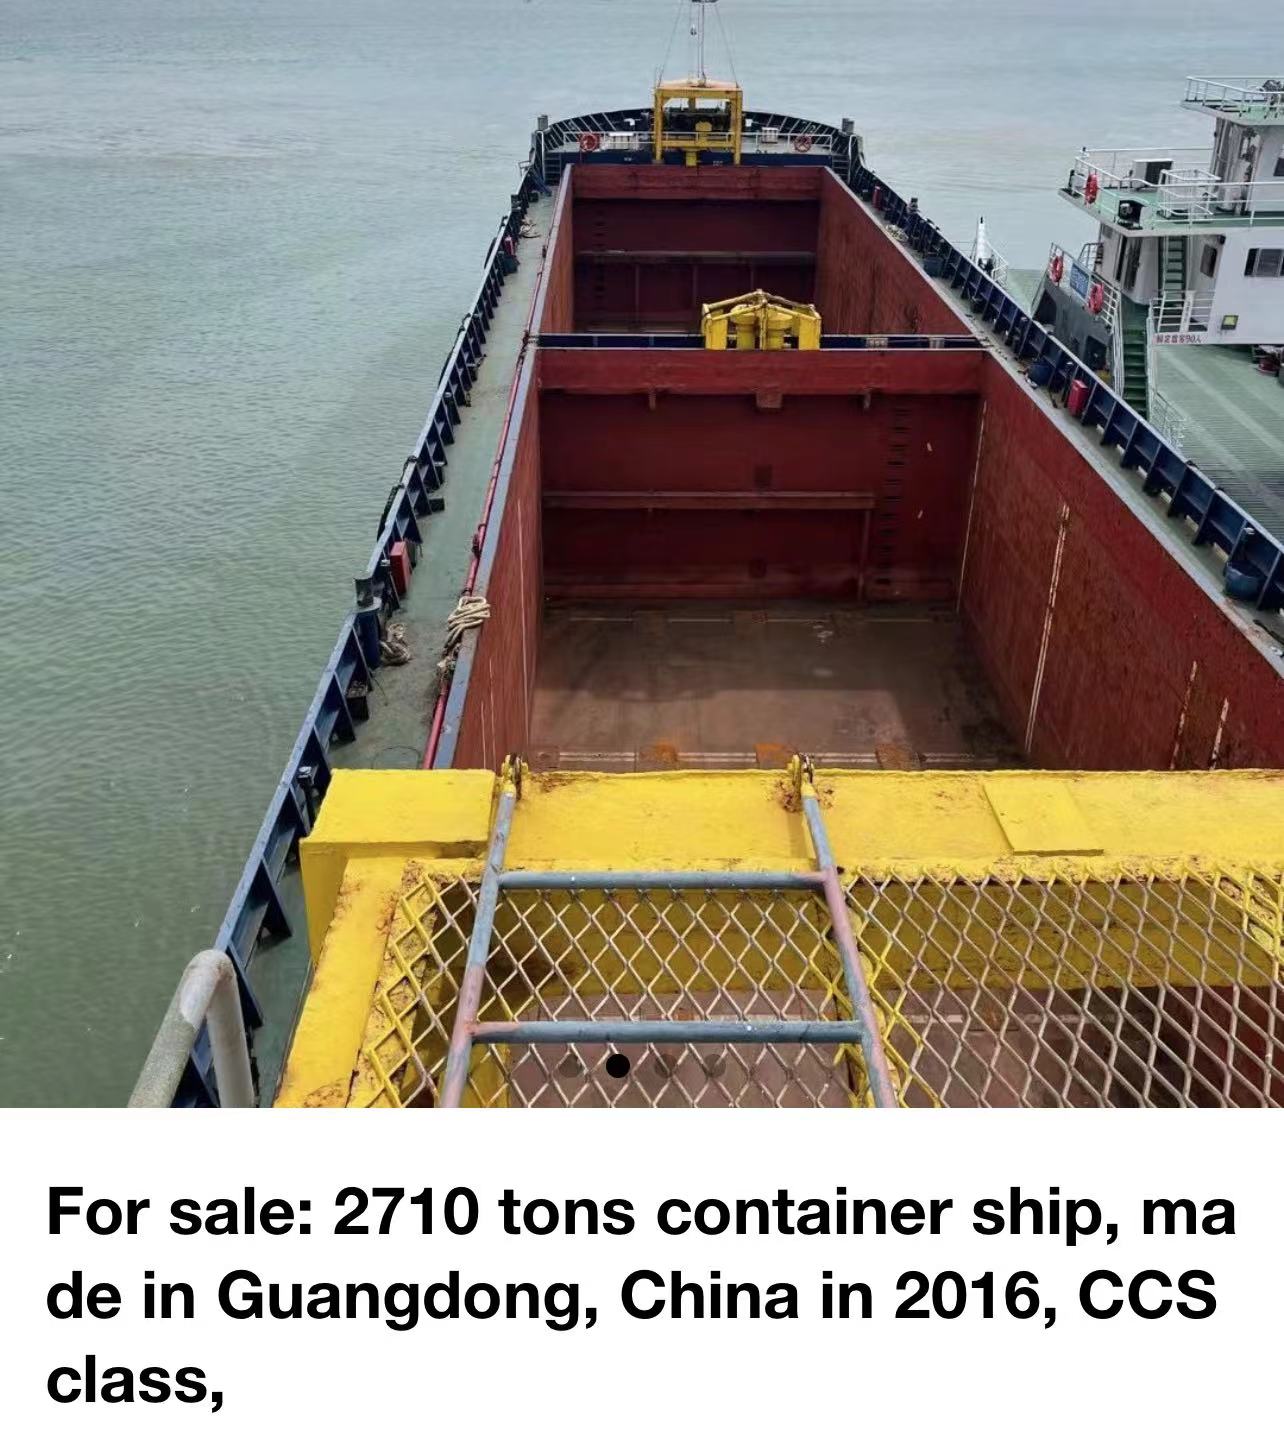 For sale: 2710 tons container ship, made in Guangdong, China in 2016, CCS class,  144TEU